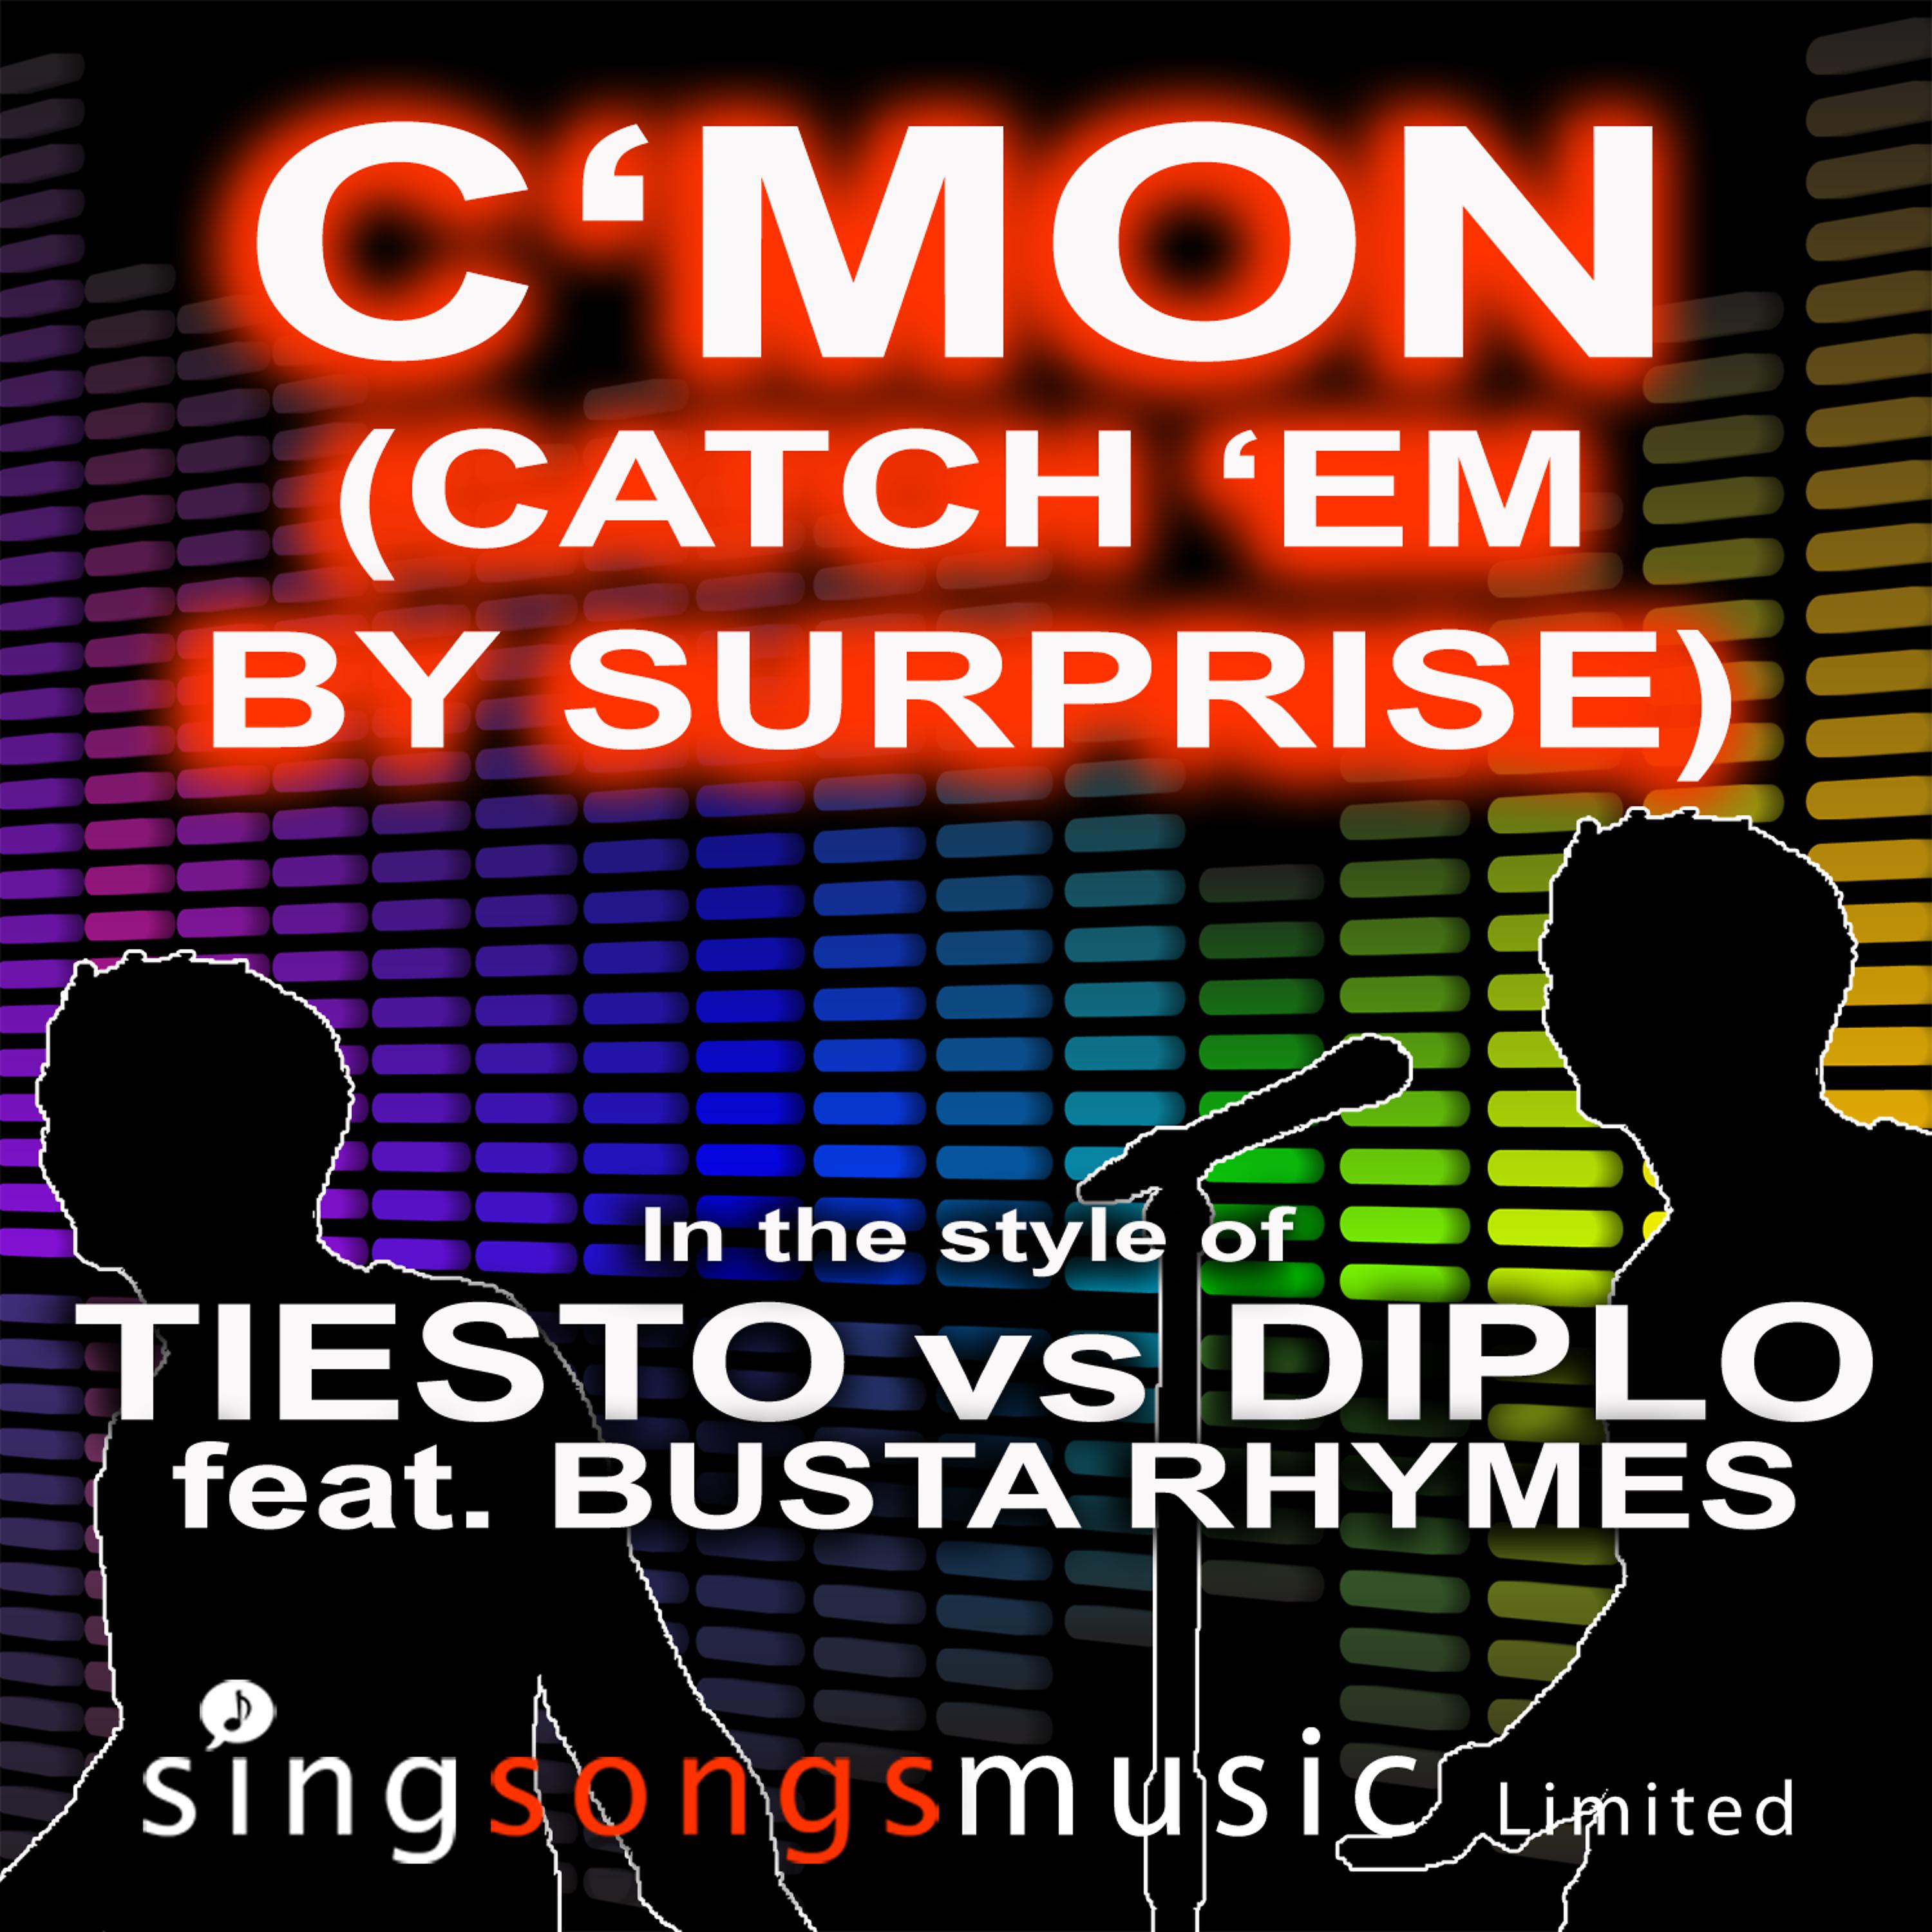 Постер альбома C'Mon (Catch 'Em By Surprise) (In the style of Tiesto vs Diplo feat. Busta Rhymes)